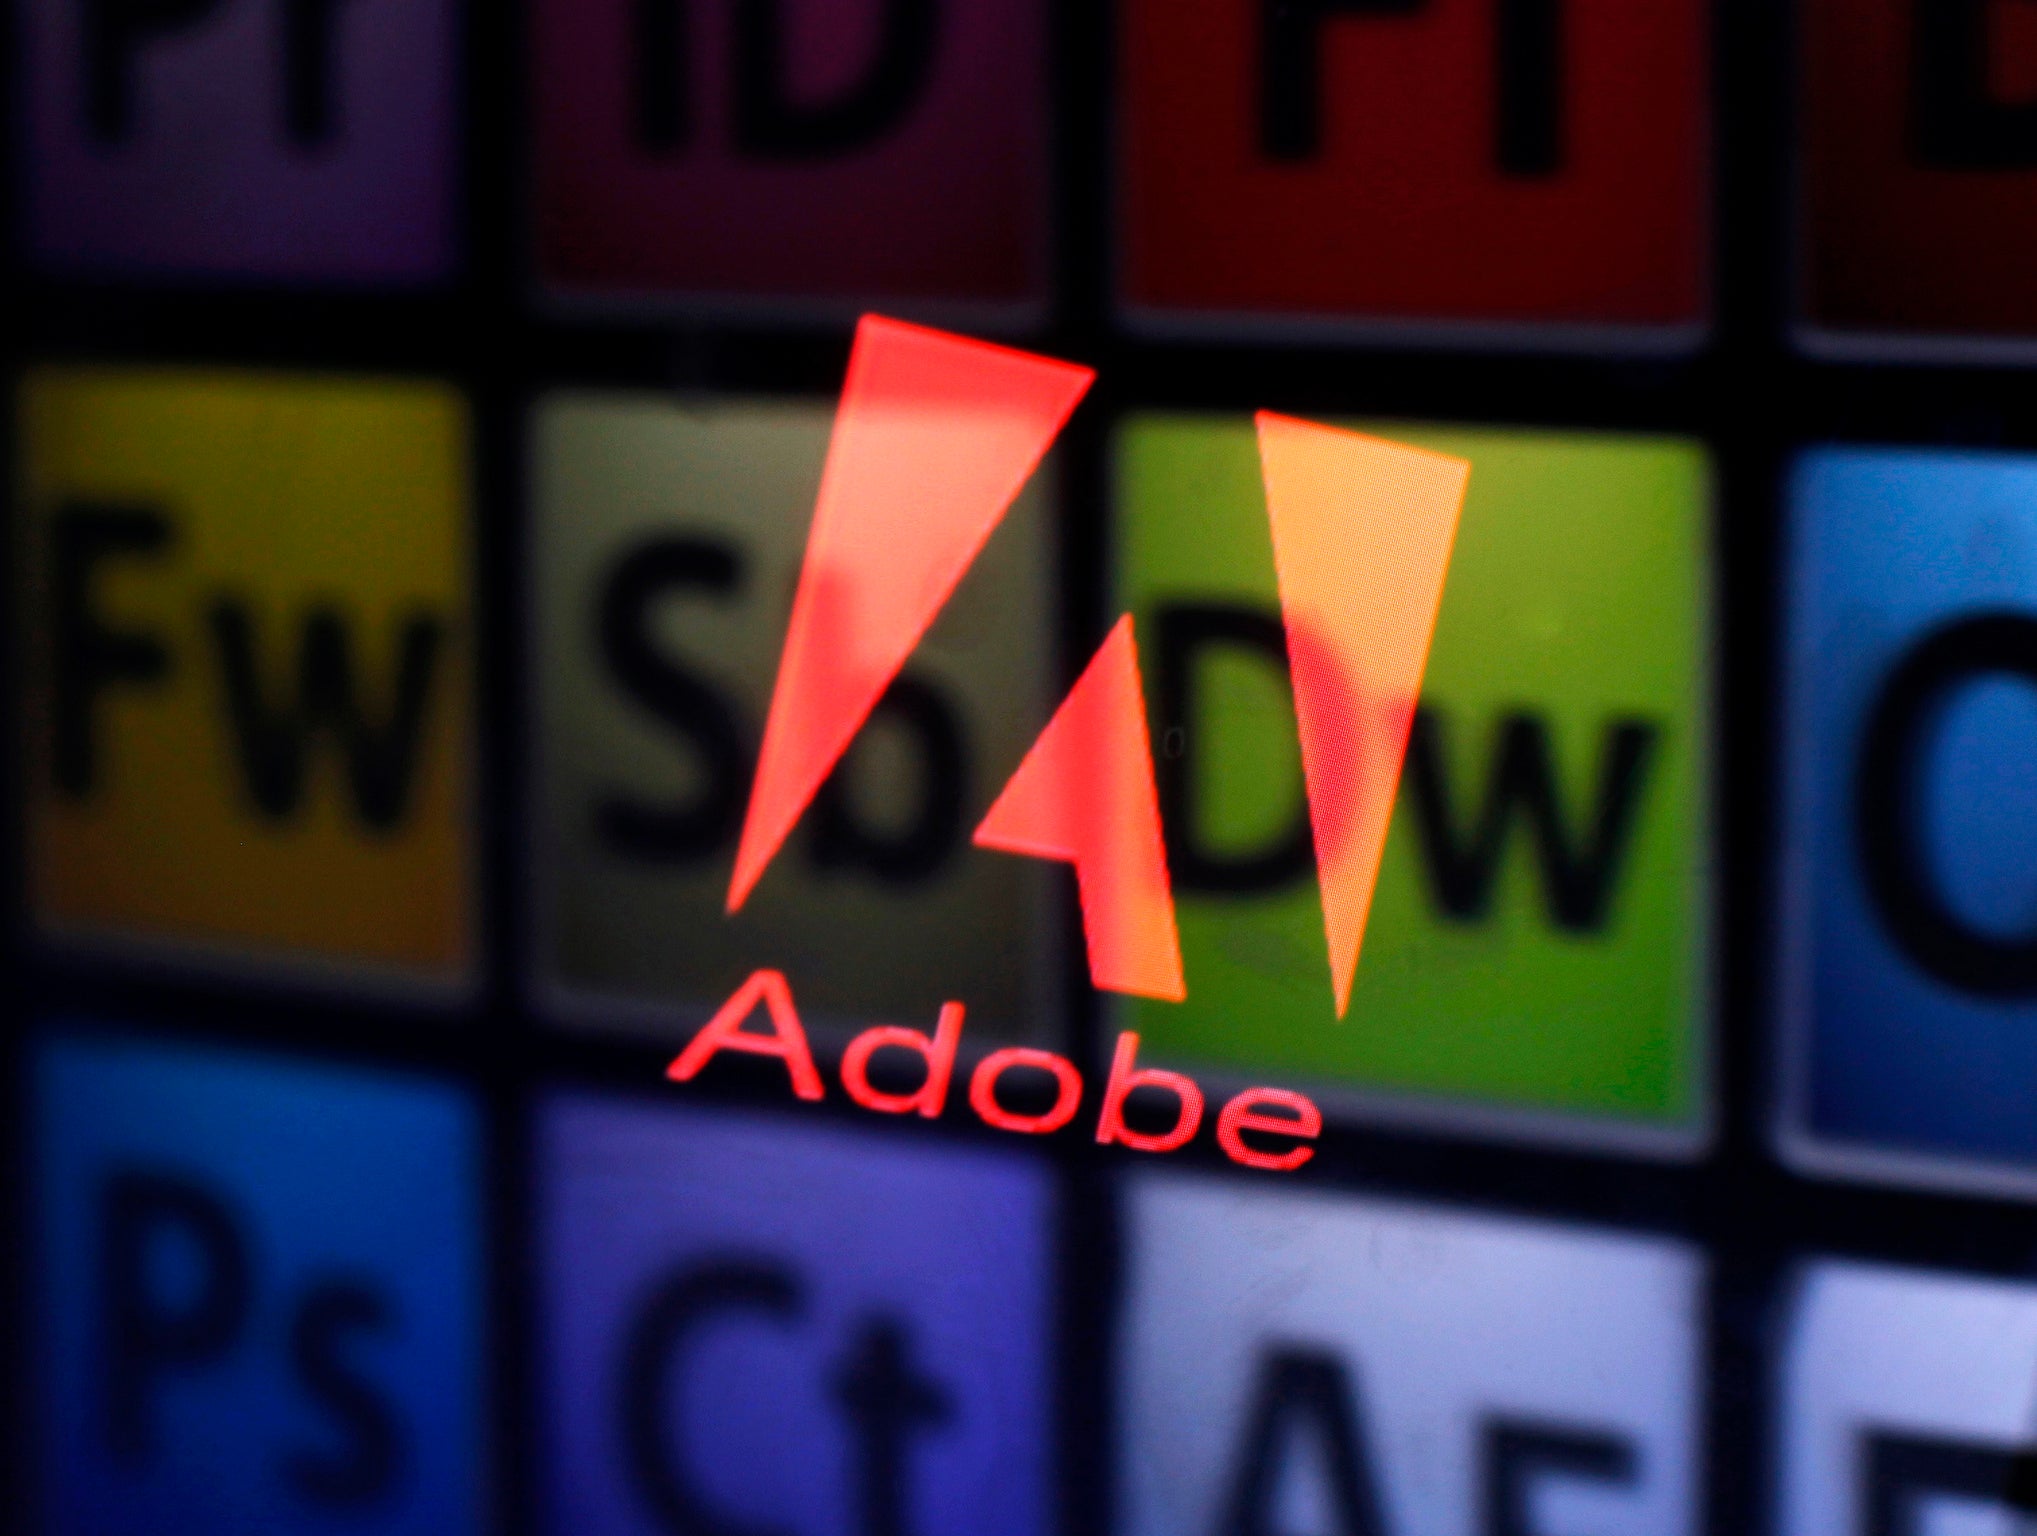 2013An Adobe logo and Adobe products are seen reflected on a monitor display and an iPad screen.